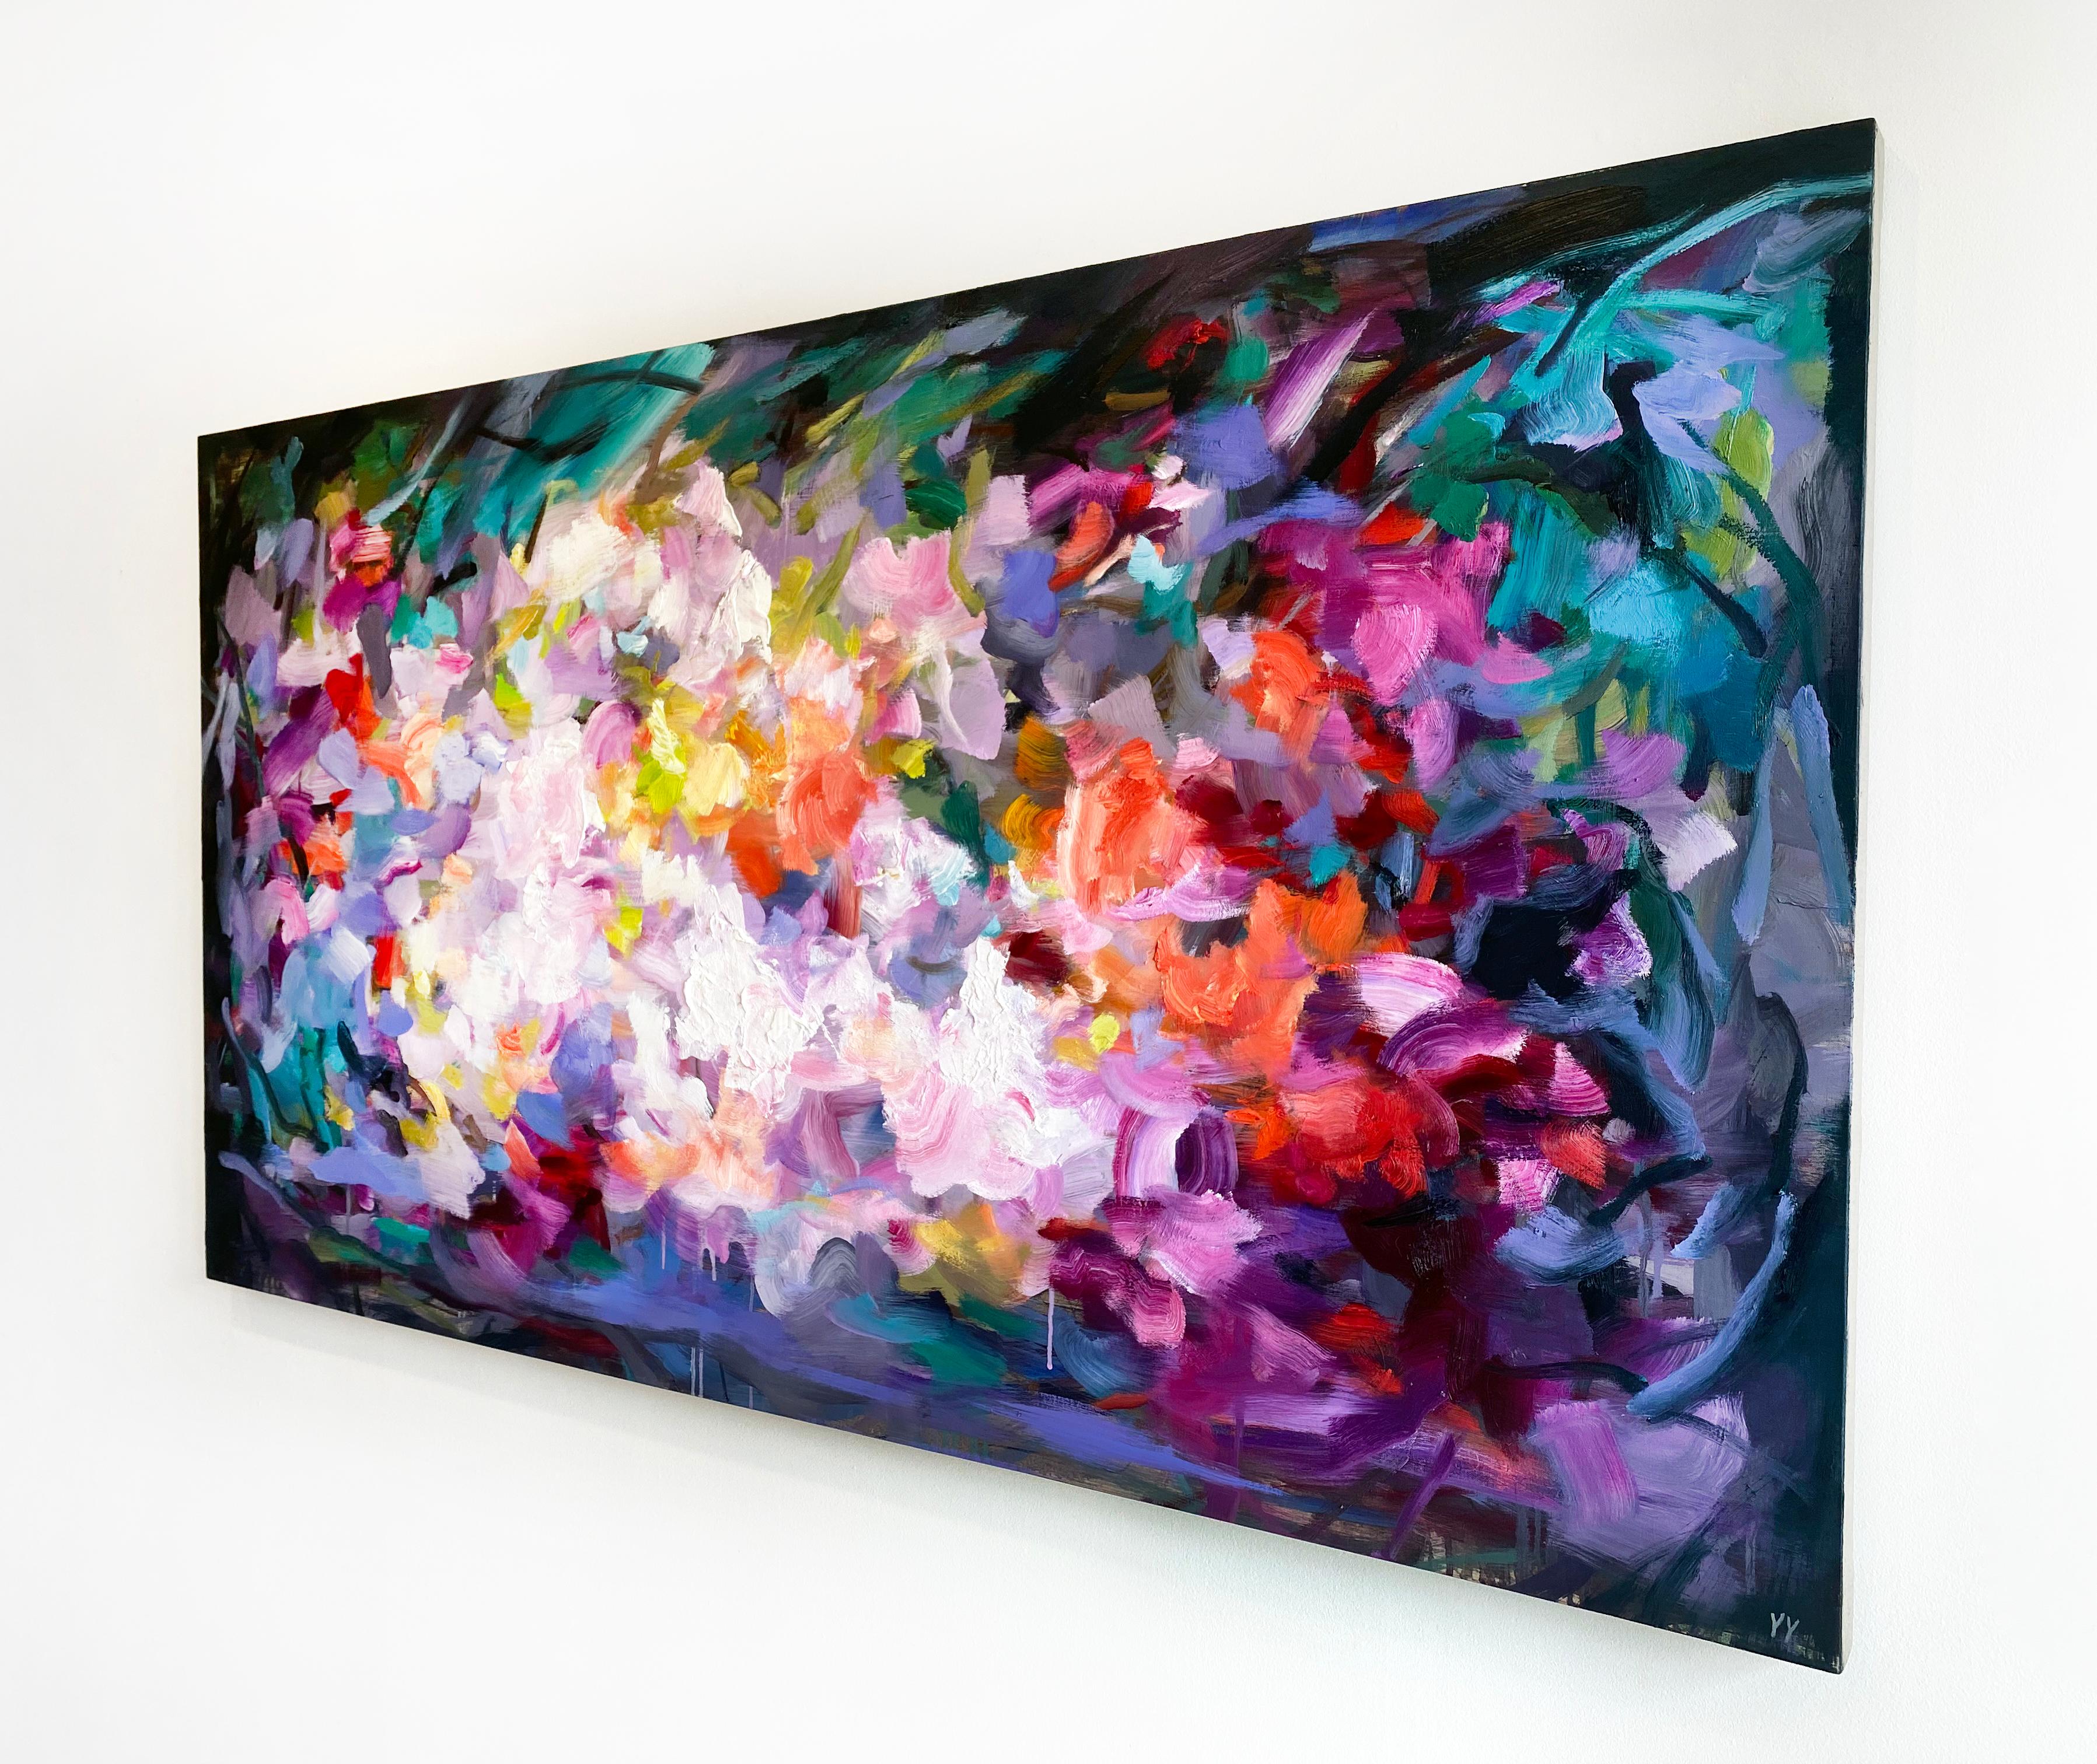 'Luscious' 2021 by Chinese/Canadian artist Yangyang Pan. Oil on linen, 40 x 72 in. This beautiful abstract-expressionistic painting incorporates large gestural brushstrokes in bold colors of purple, pink, blue, red, yellow, and green.

Yangyang Pan